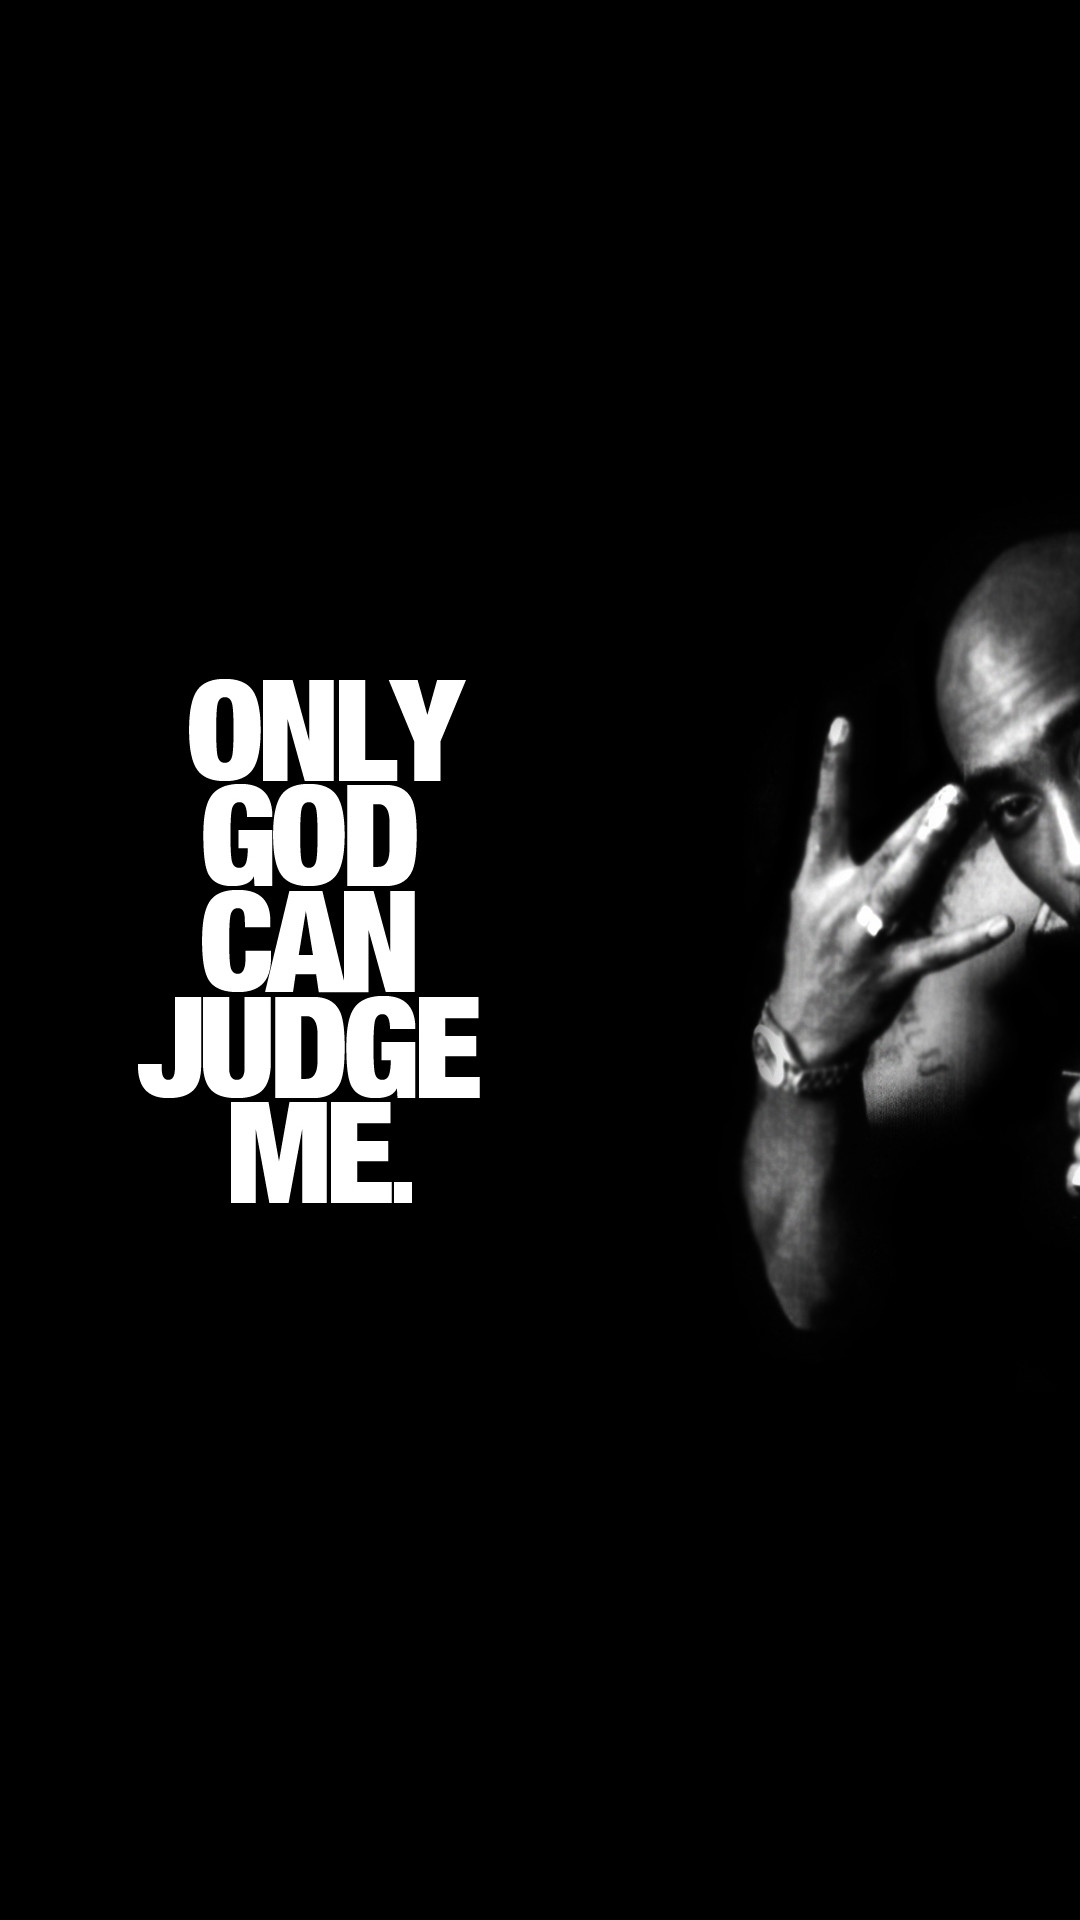 Tupac only can judge me iphone 6 plus hd wallpaper ipod